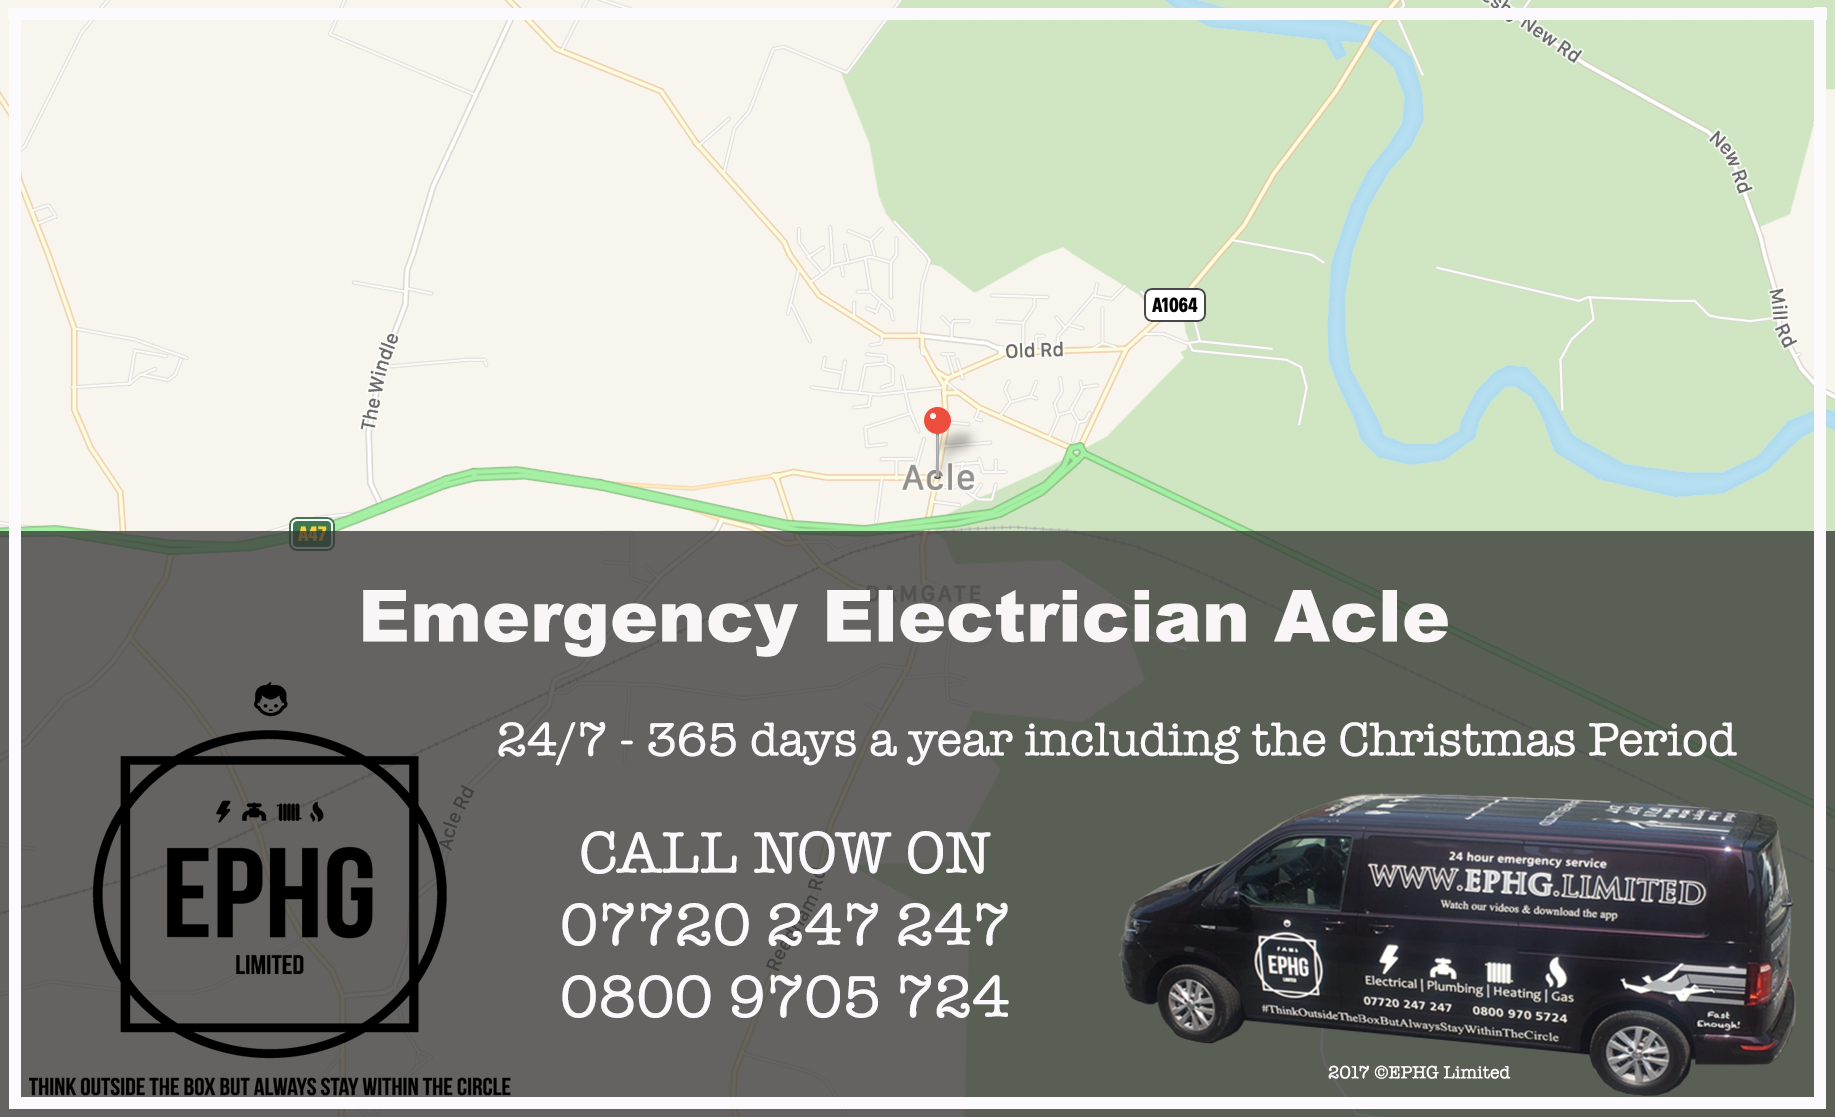 Emergency Electrician Acle